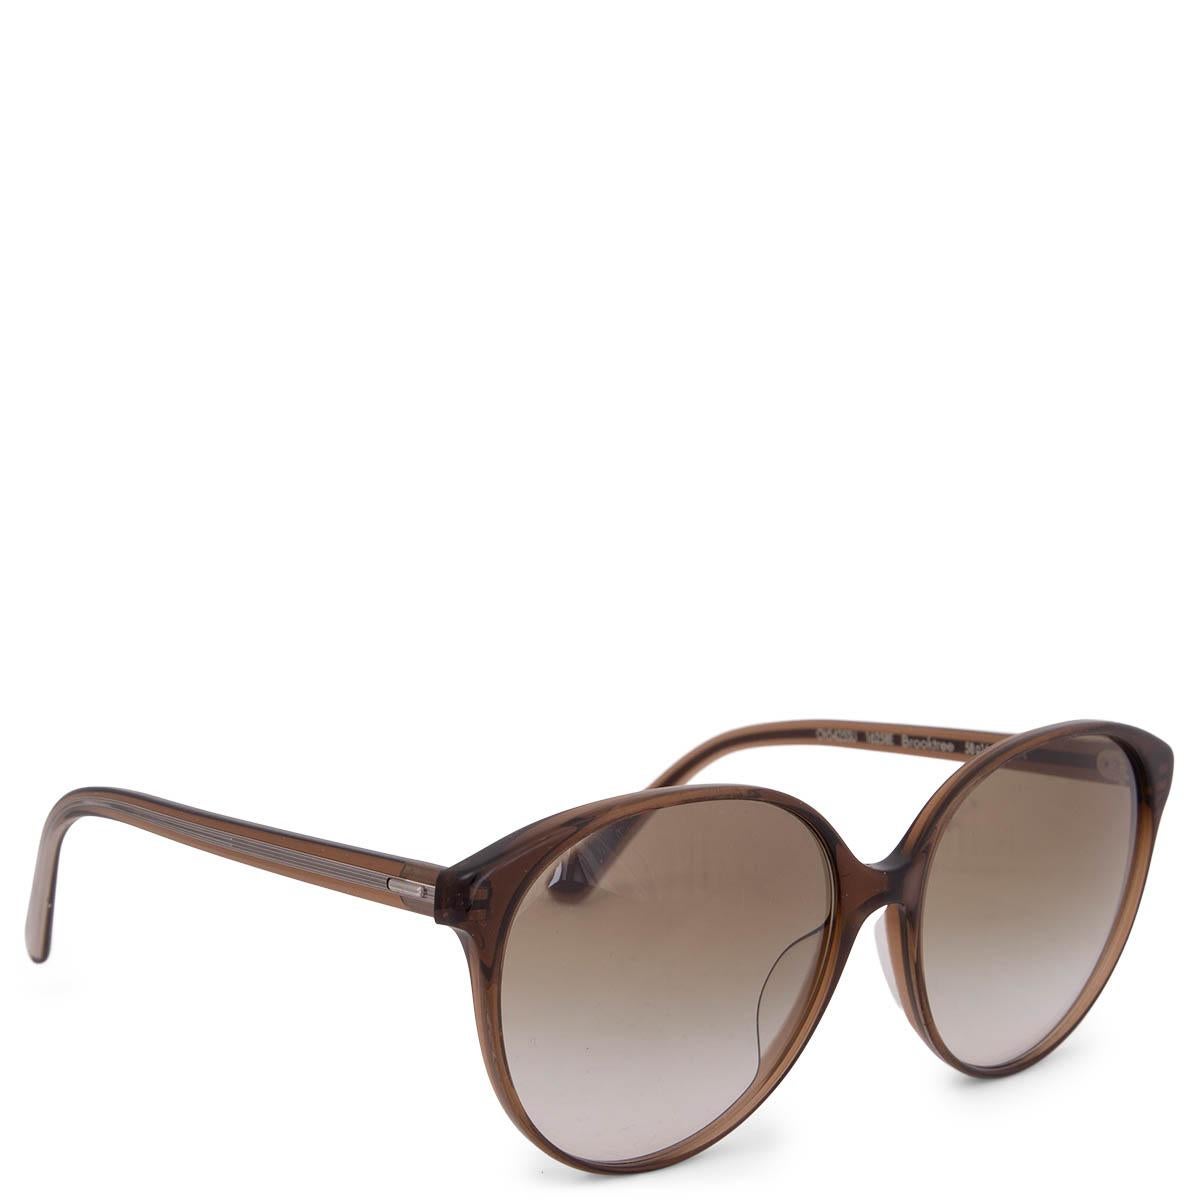 100% authentic Oliver Peoples x The Row Brooktree OV5425SU Oversized Round Sunglasses in brown acetate and light brown gradient lenses. Have been worn and are in excellent condition. Come with case.

Measurements
Model	OV5425SU
Width	14cm